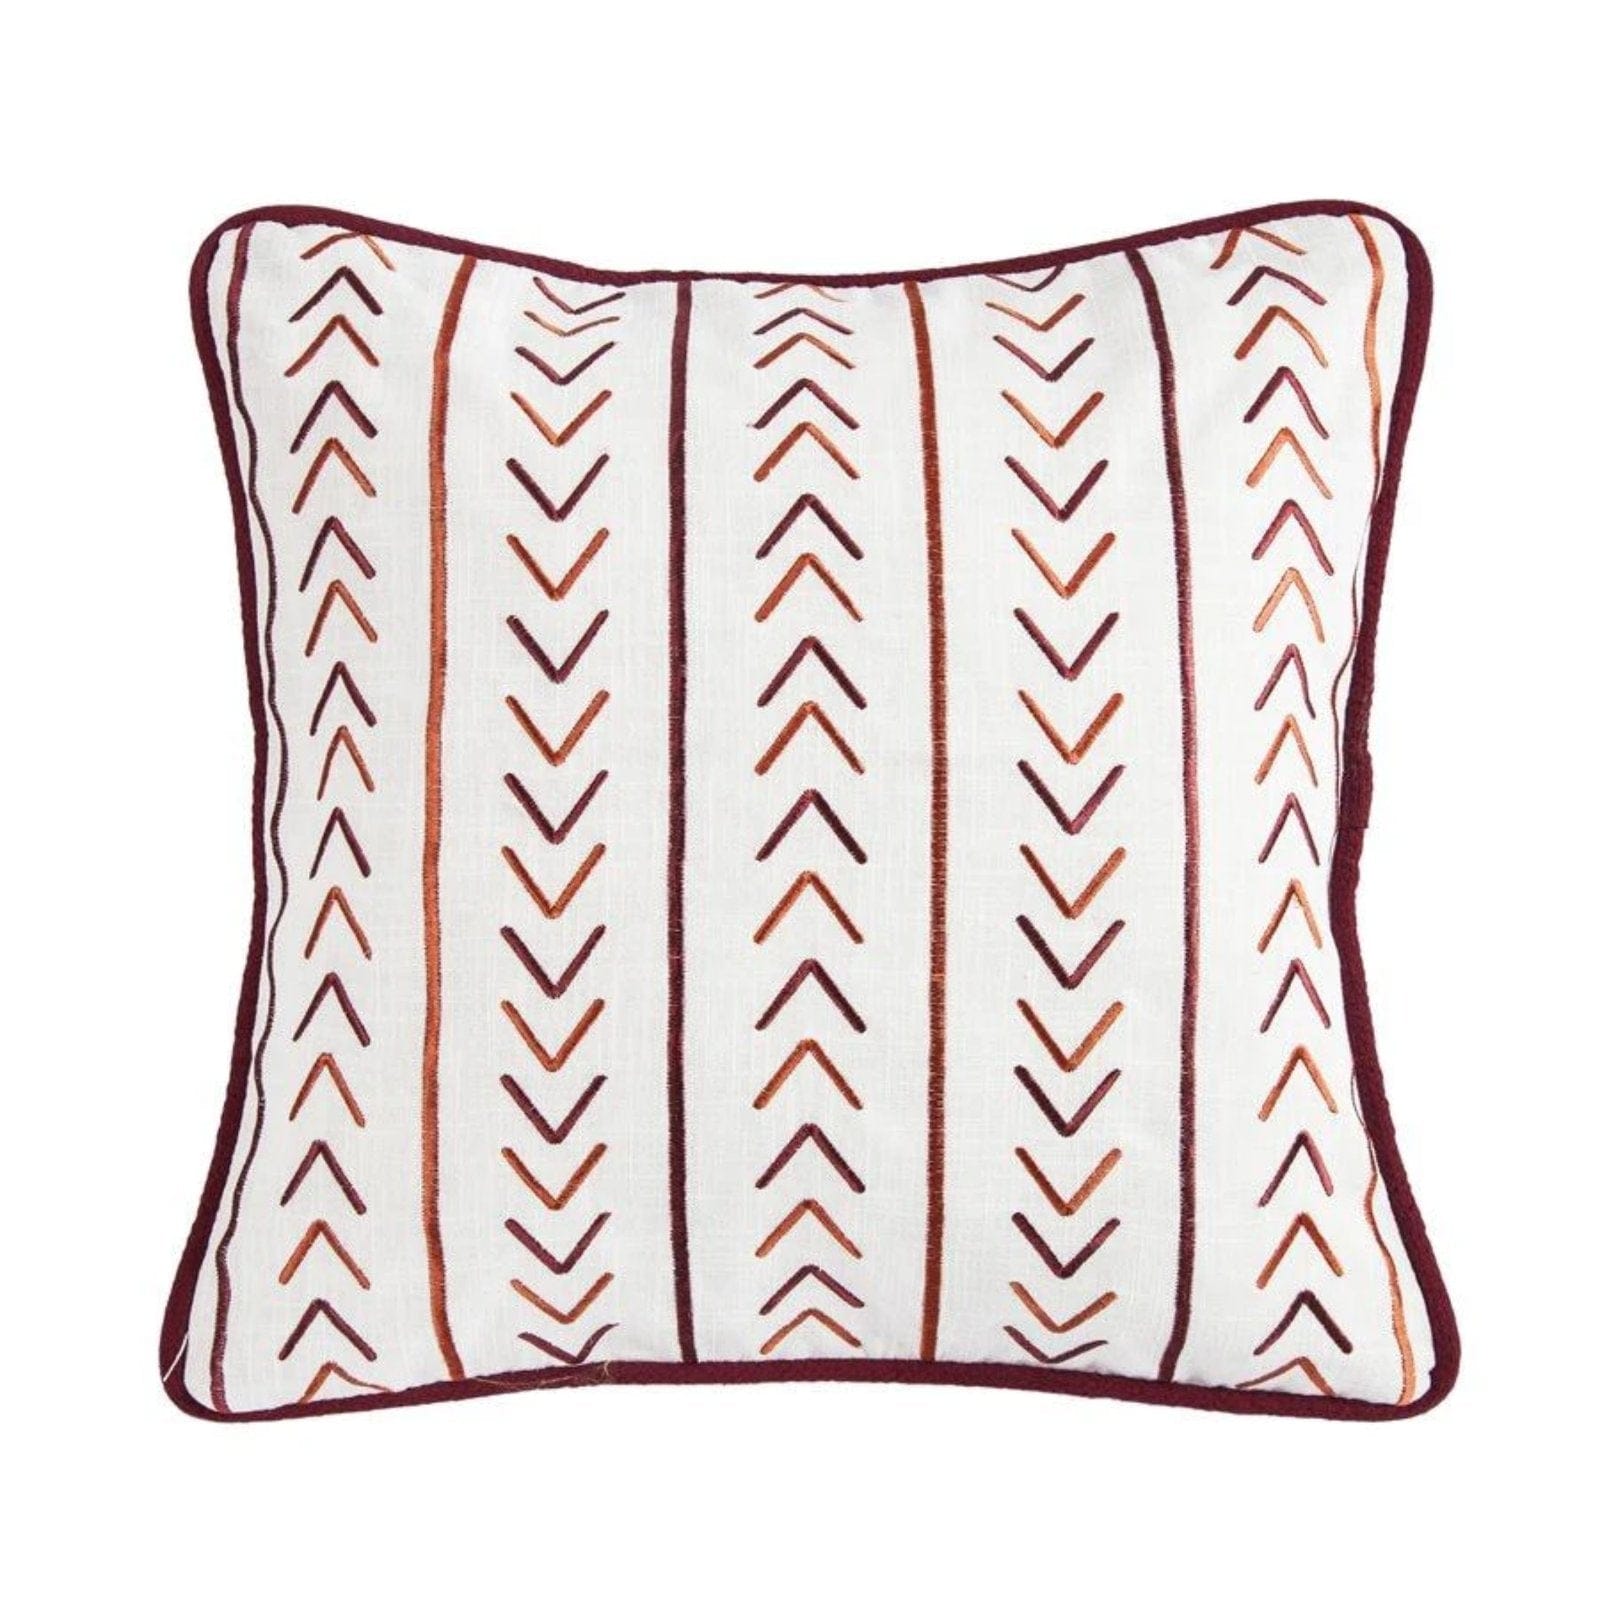 Solace Embroidered Throw Pillow w/ Stripes, 18x18 Pillow